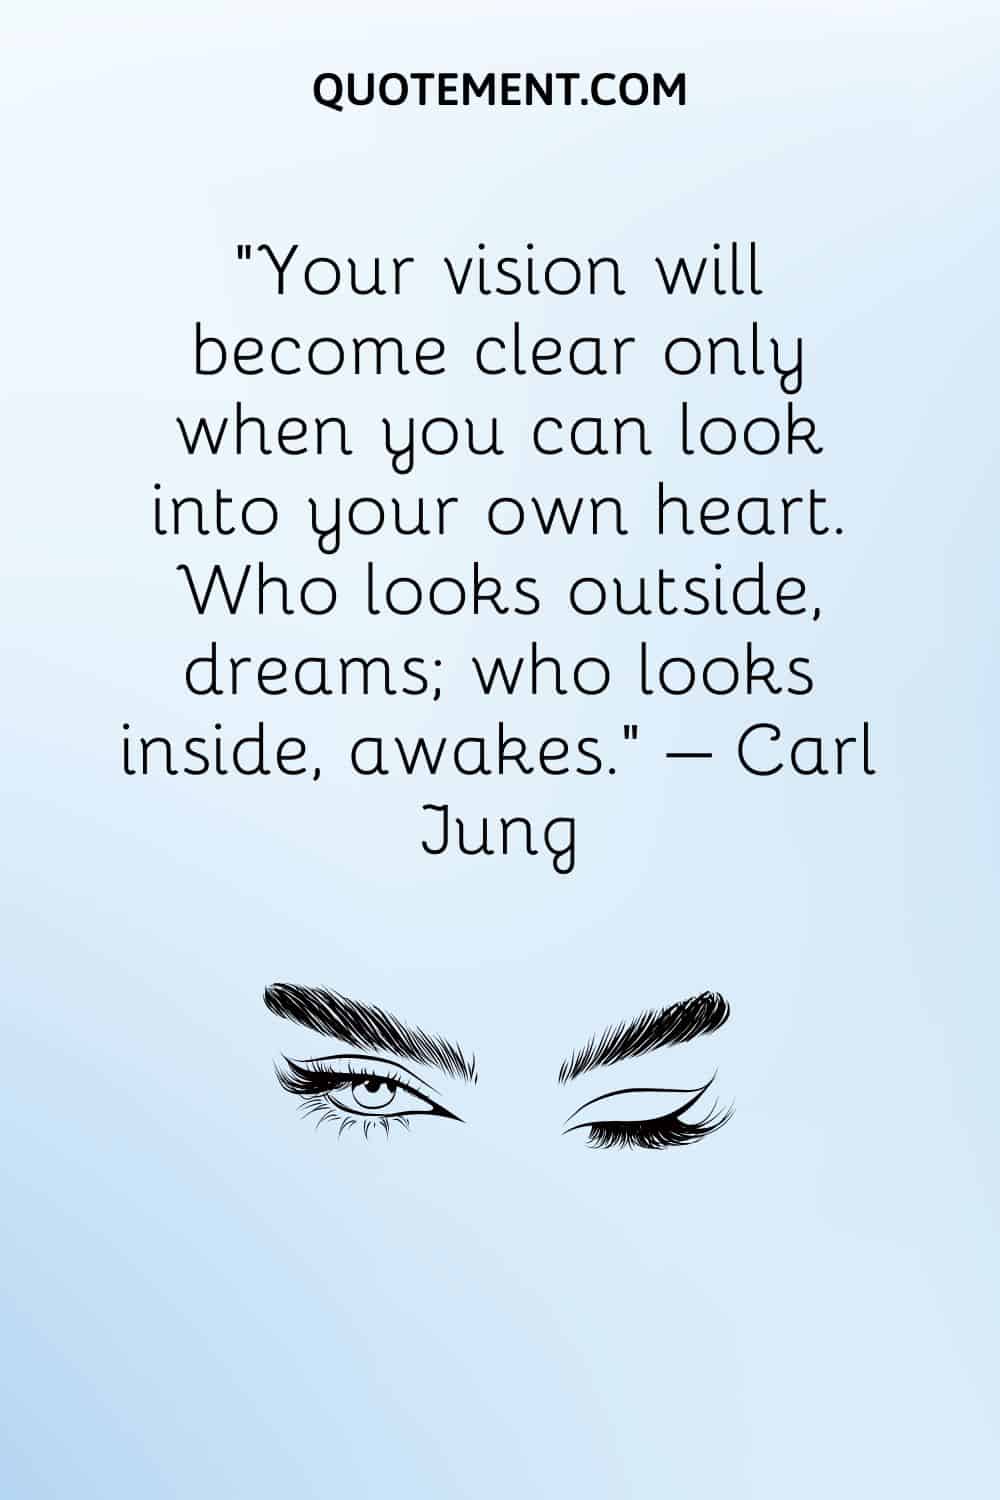 Your vision will become clear only when you can look into your own heart. Who looks outside, dreams; who looks inside, awakes